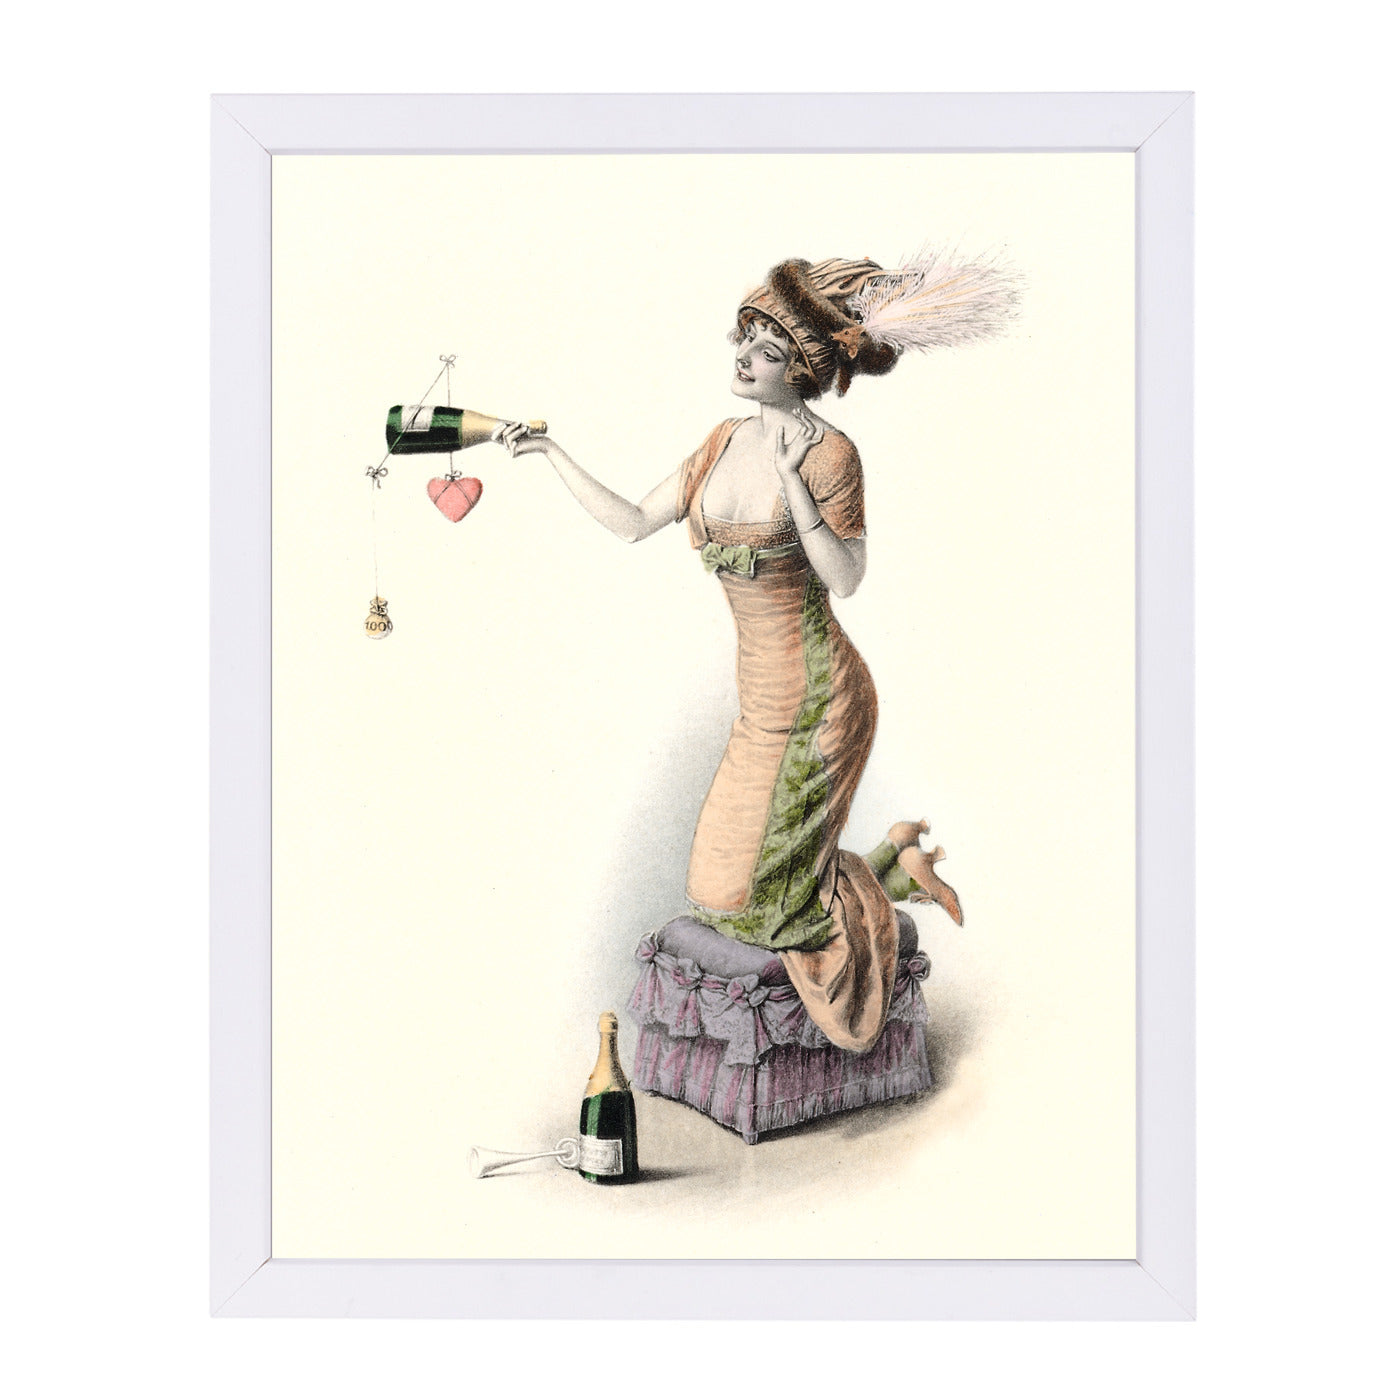 Woman With Champagne Bottle by Found Image Press Framed Print - Americanflat